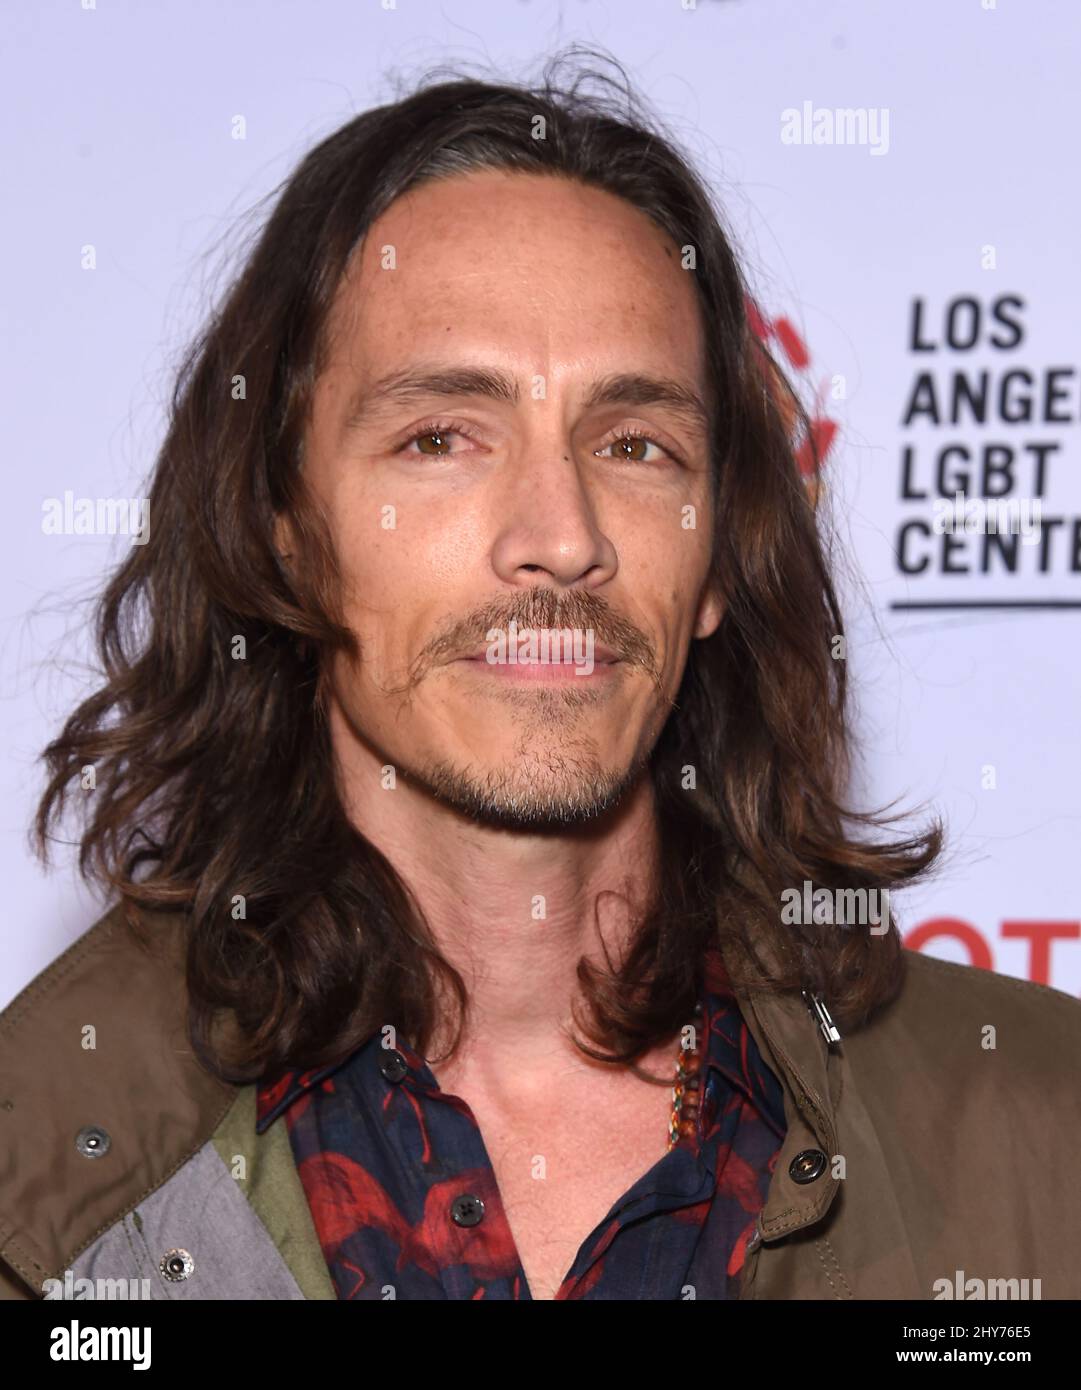 Brandon Boyd attends An Evening With Women held at the Palladium. Stock Photo